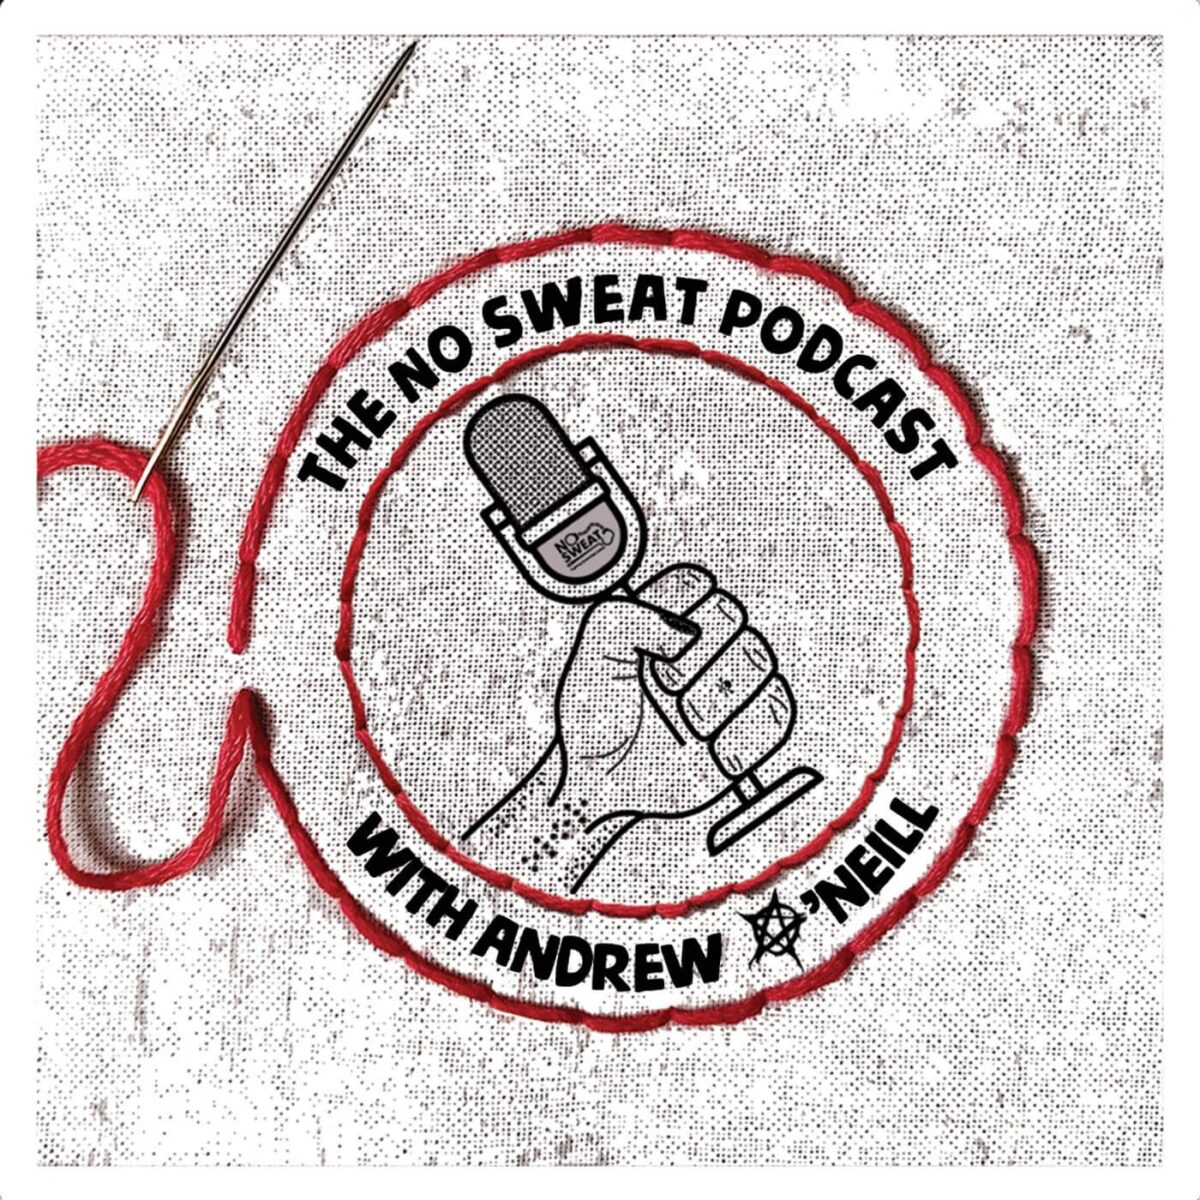 4dcc2370-0e4e-4f93-a322-45091ec81991_no_sweat_podcast_with_andrew_oneill_smallest_2